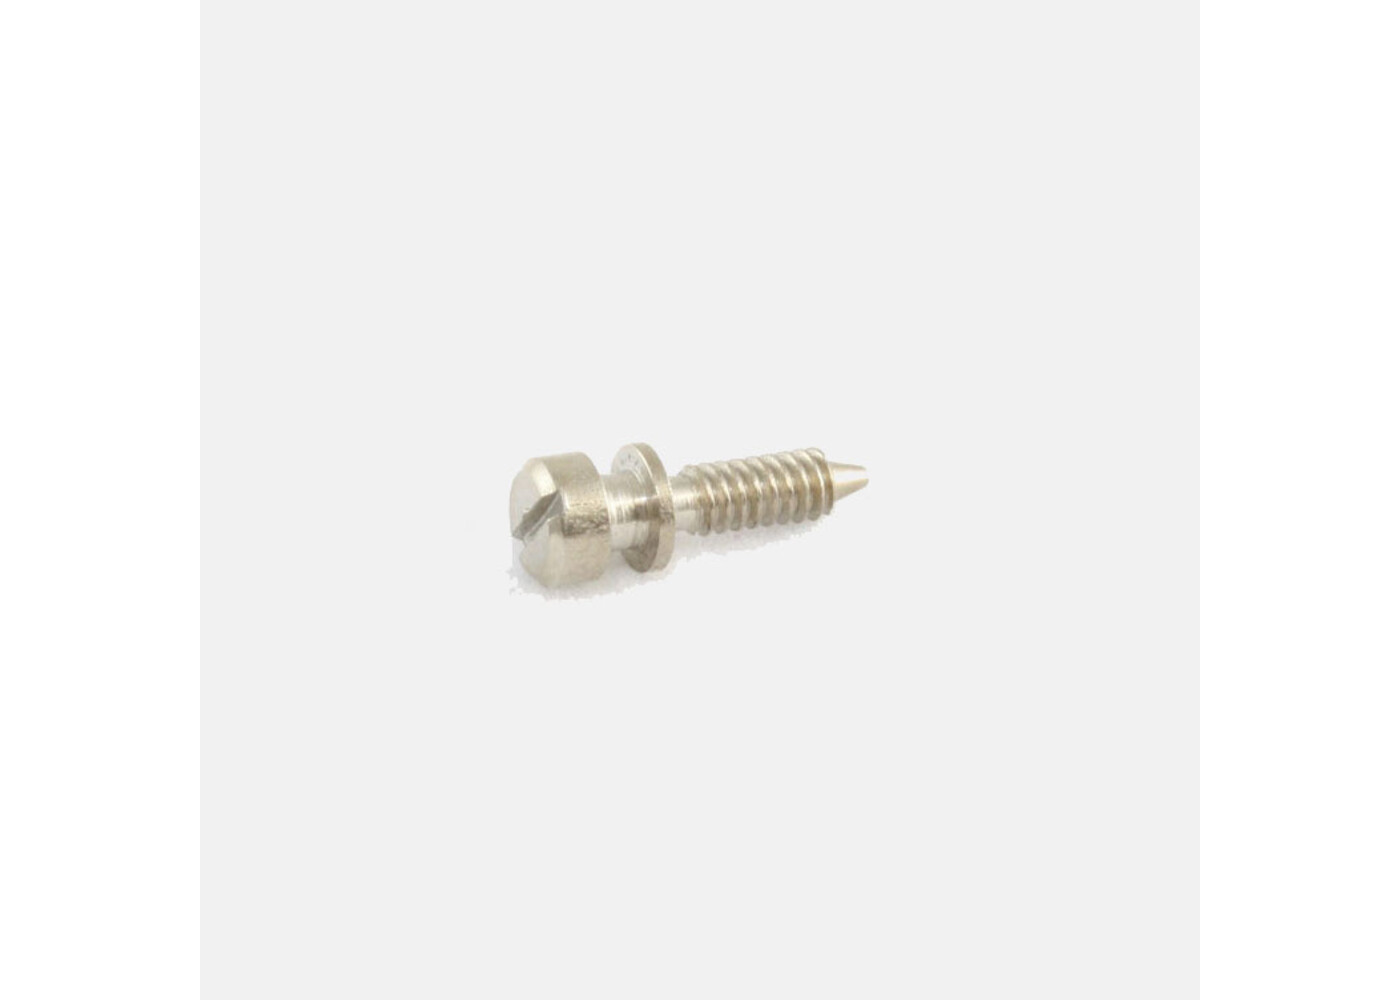 Allparts Allparts Intonation Screws for Old-Style Tune-o-matic (Pack of 6), Nickel